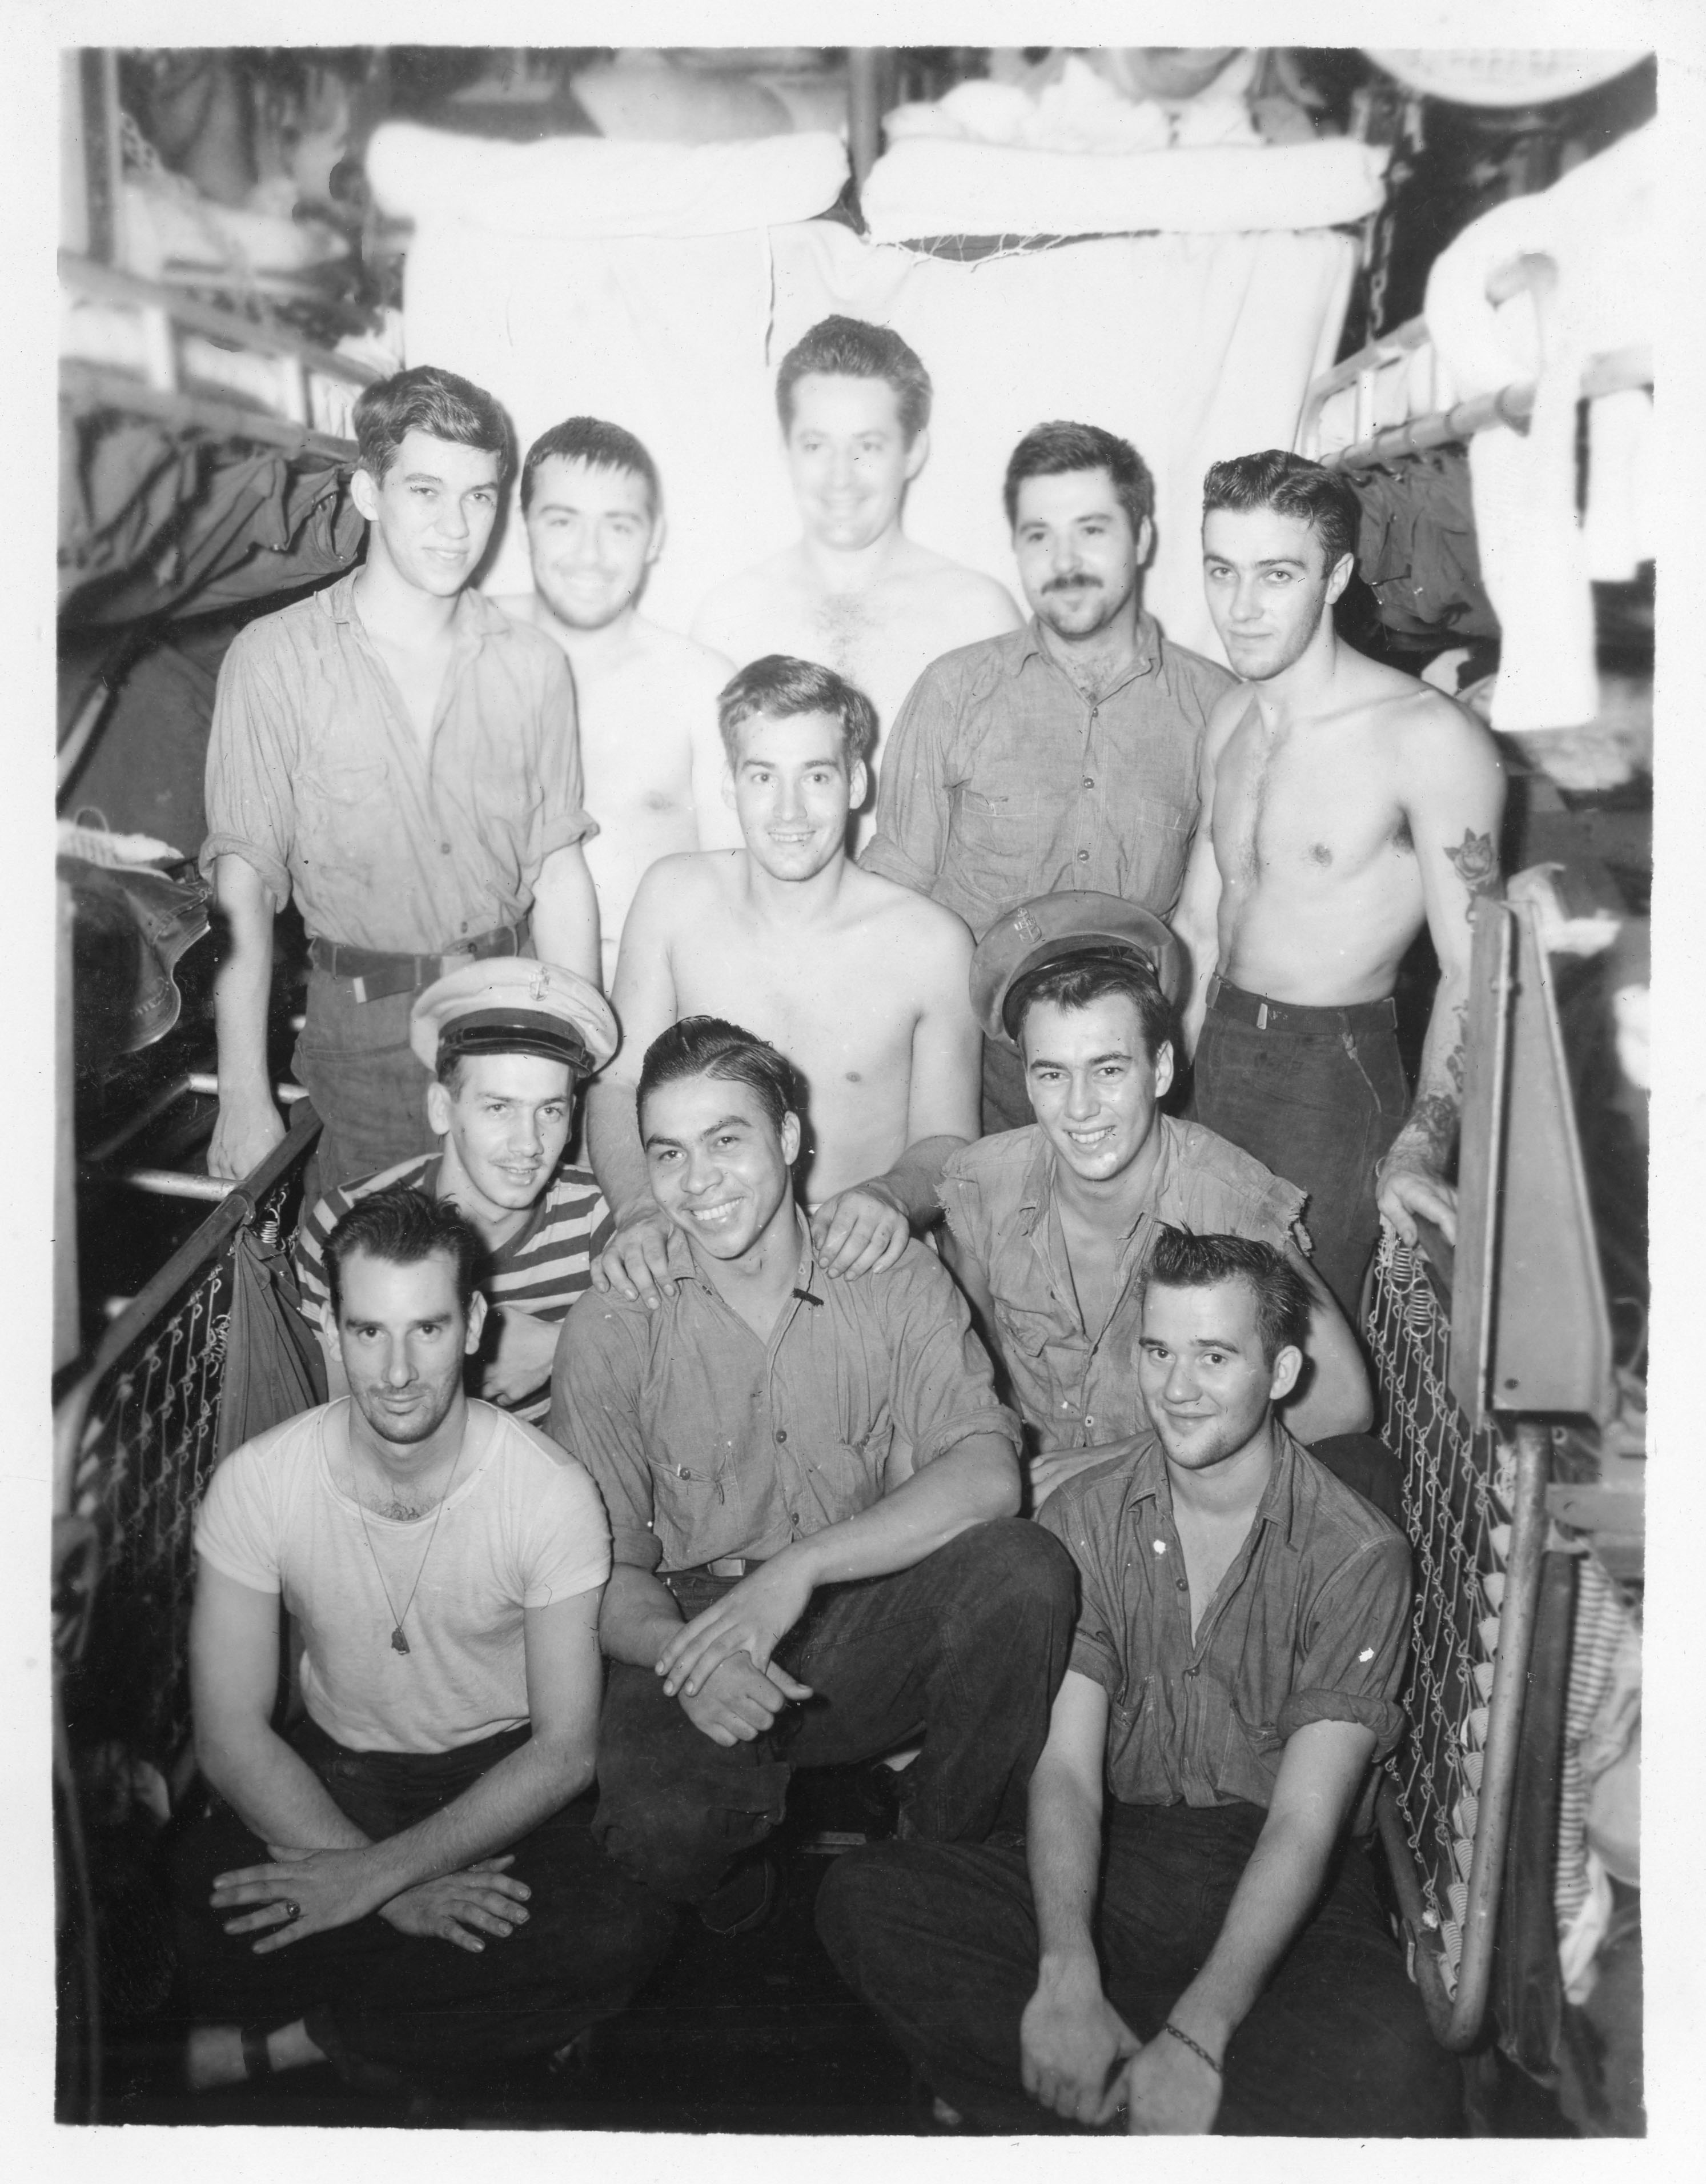 US Navy submariners, 1943-1945; they were likely crewmembers of USS Billfish, USS Bowfin, or USS Burrfish